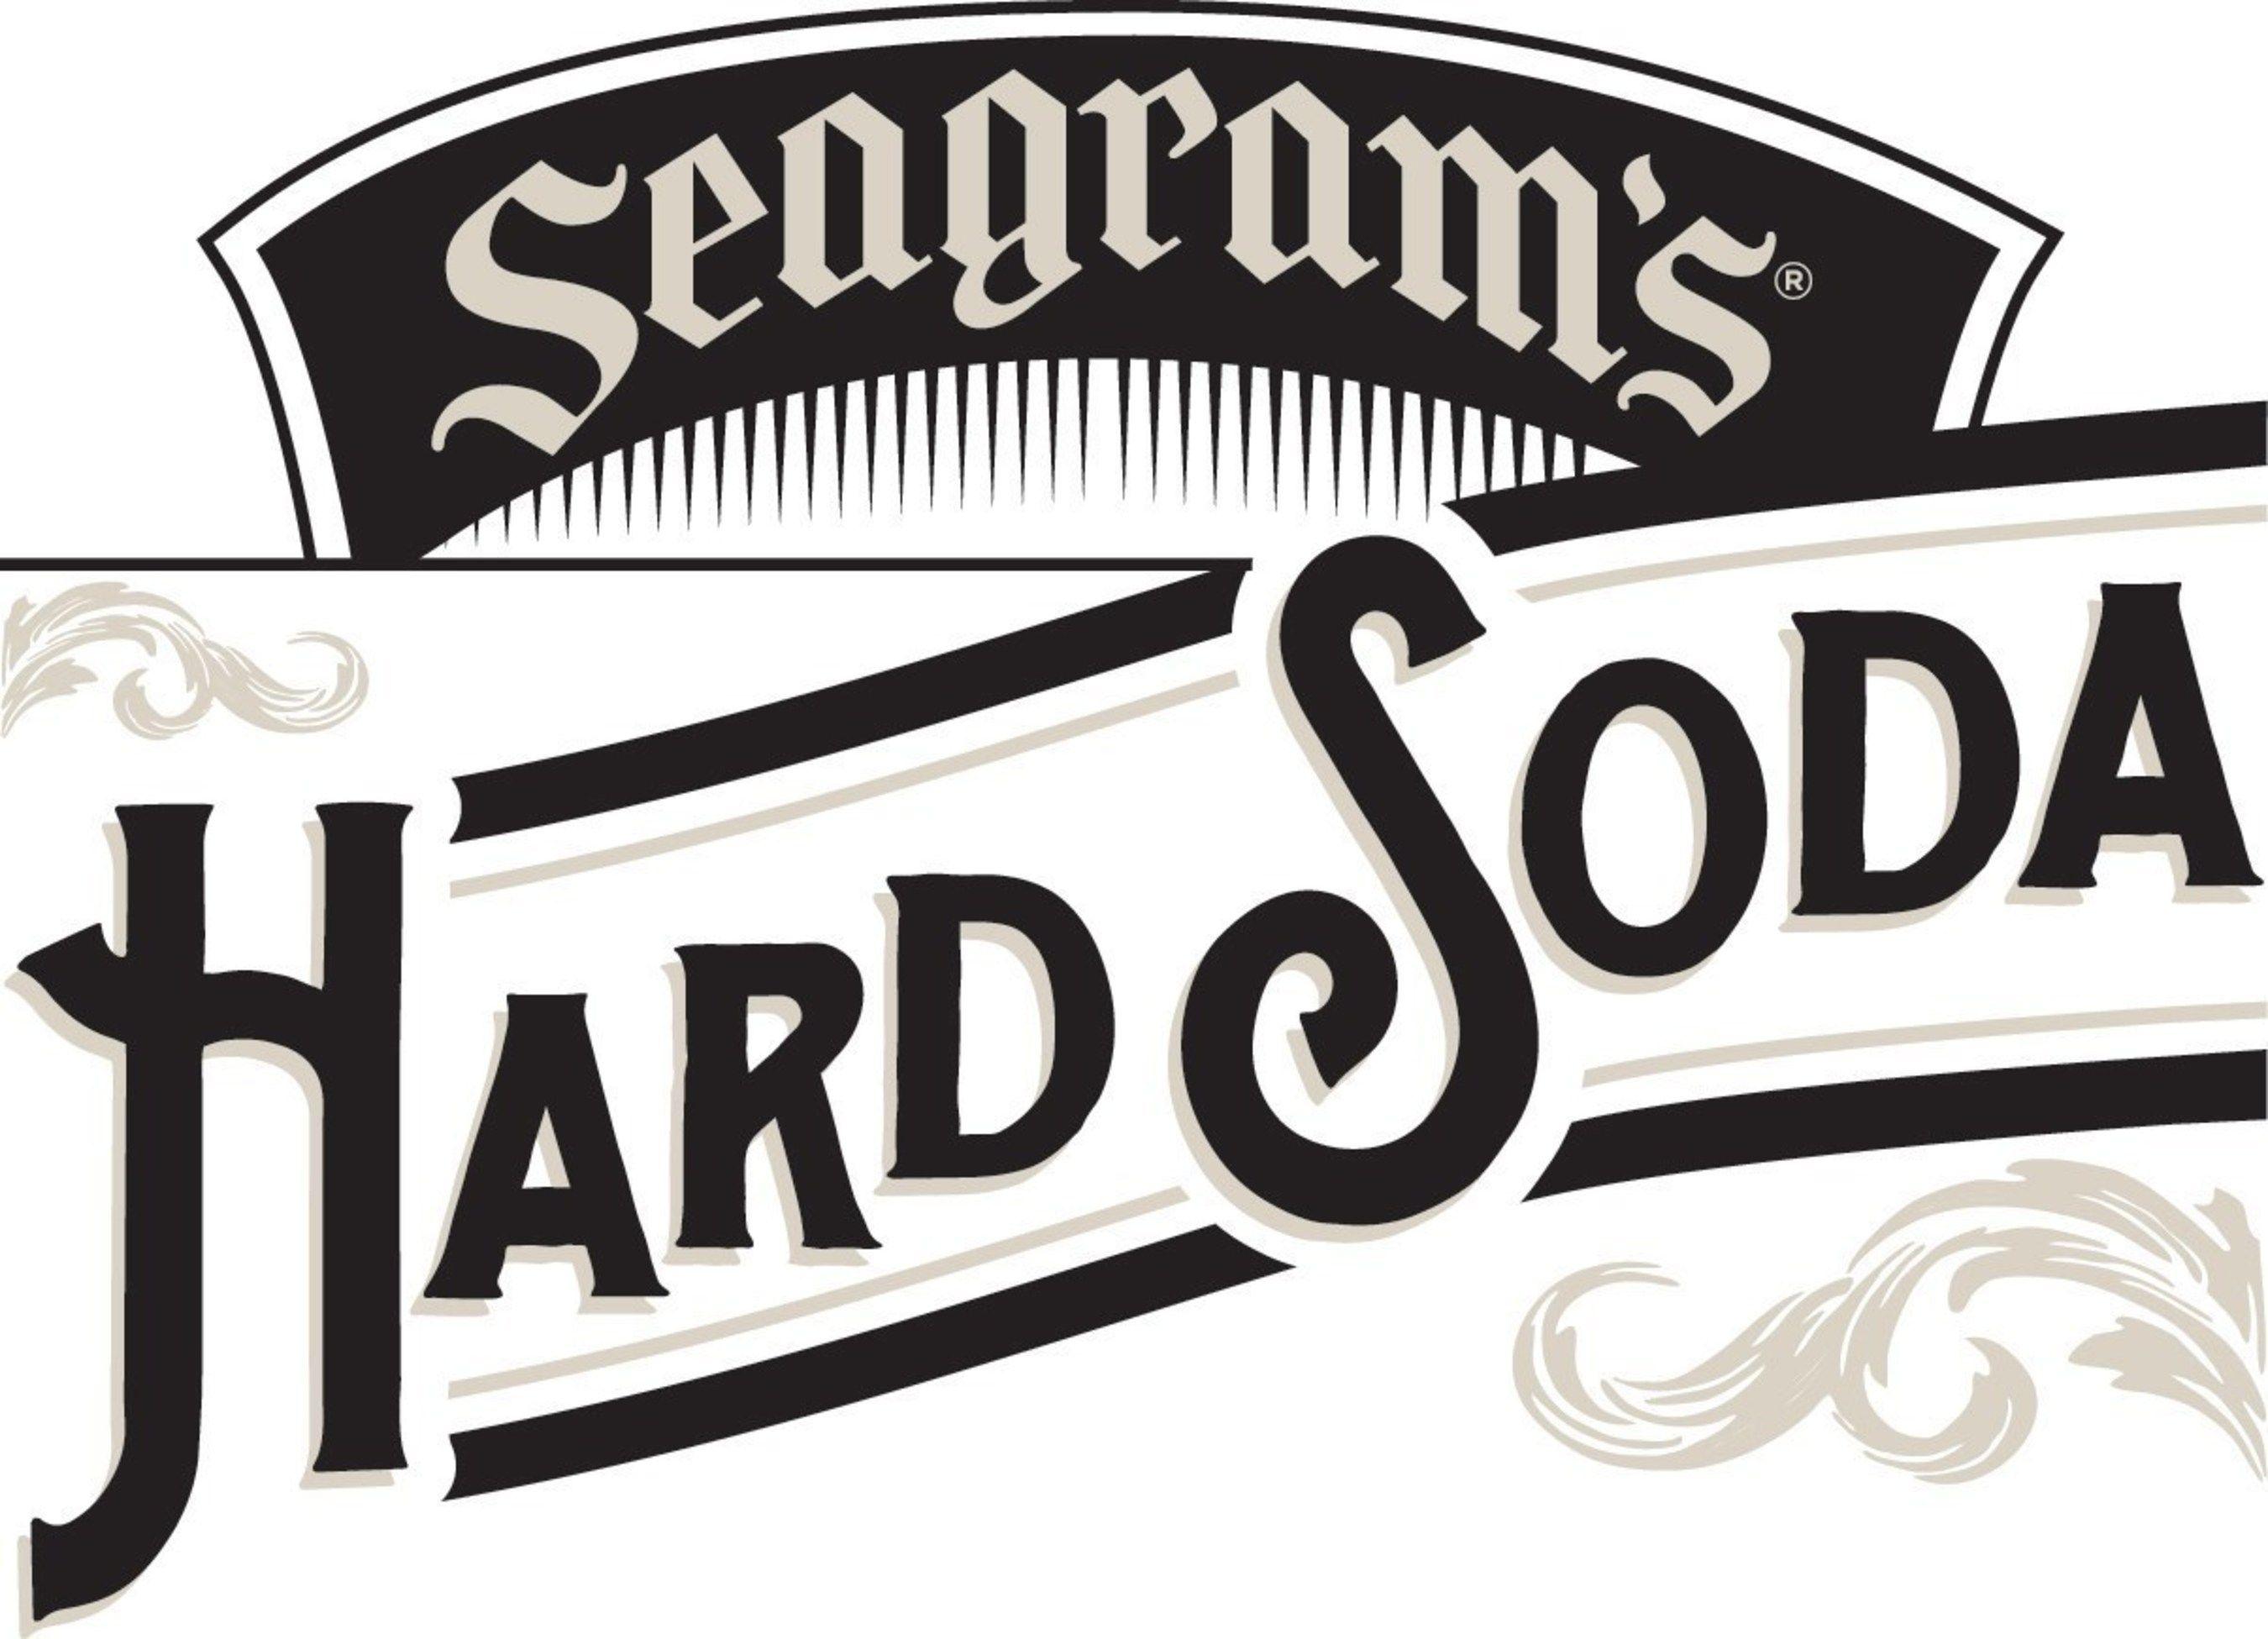 Seagram's Logo - Seagram's Introduces All New Hard Soda In Variety Of Delicious Flavors